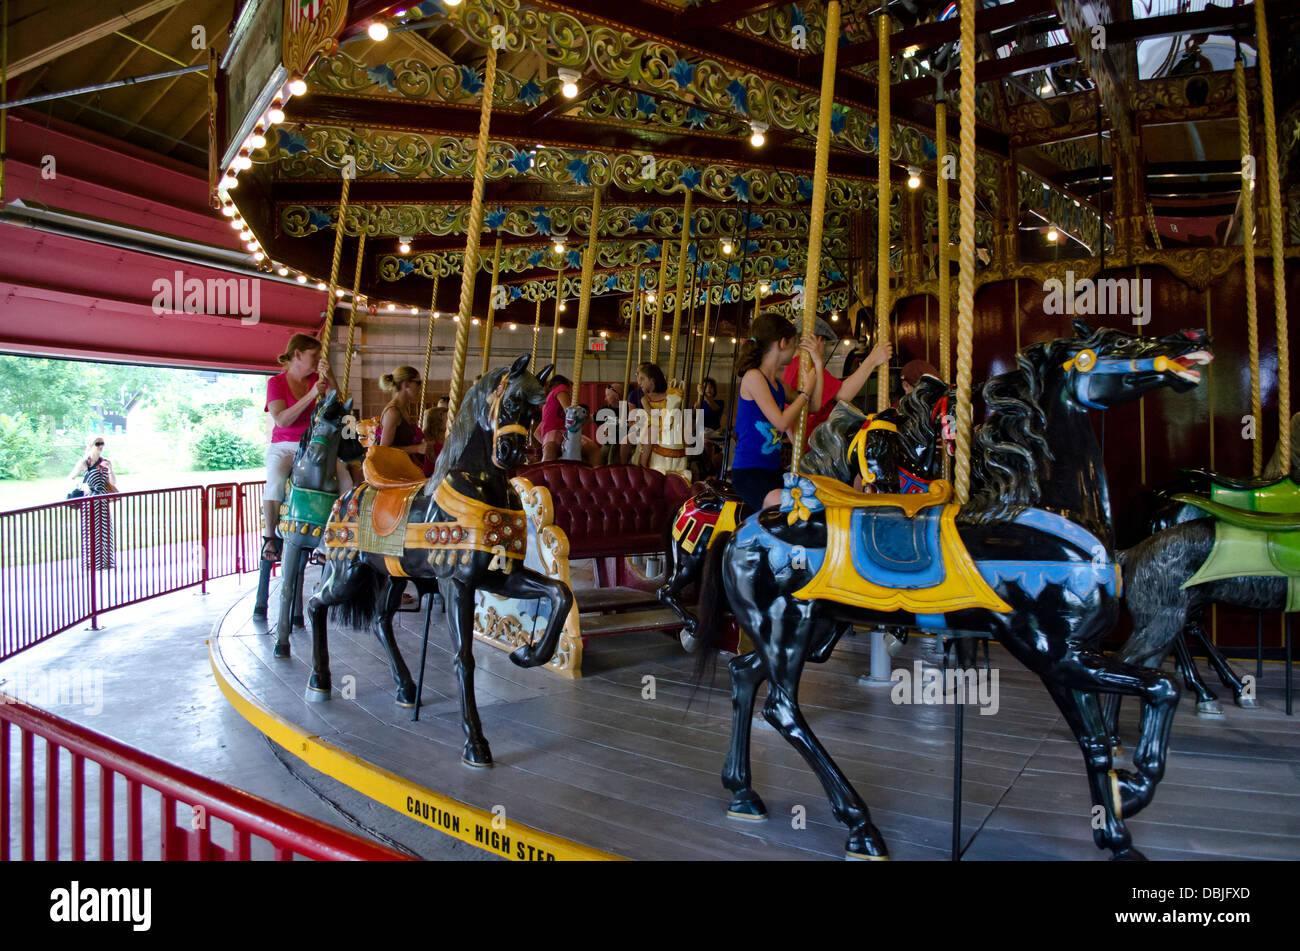 Children and adults enjoying the vintage carousel ride at Lakeside Park in St. Catharines, Ontario. Stock Photo